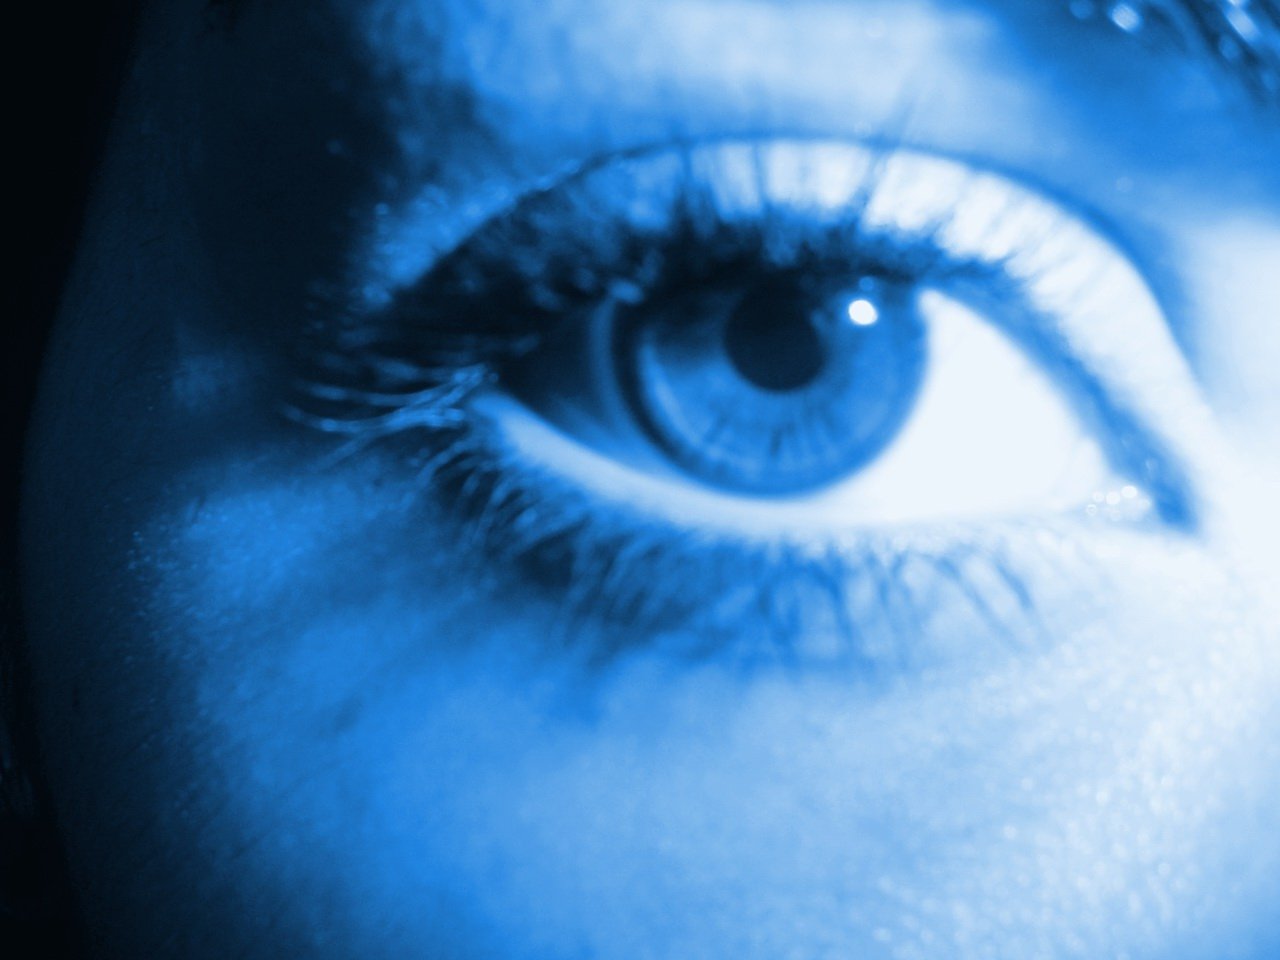 close up of blue woman's eye with water droplets over the left eye